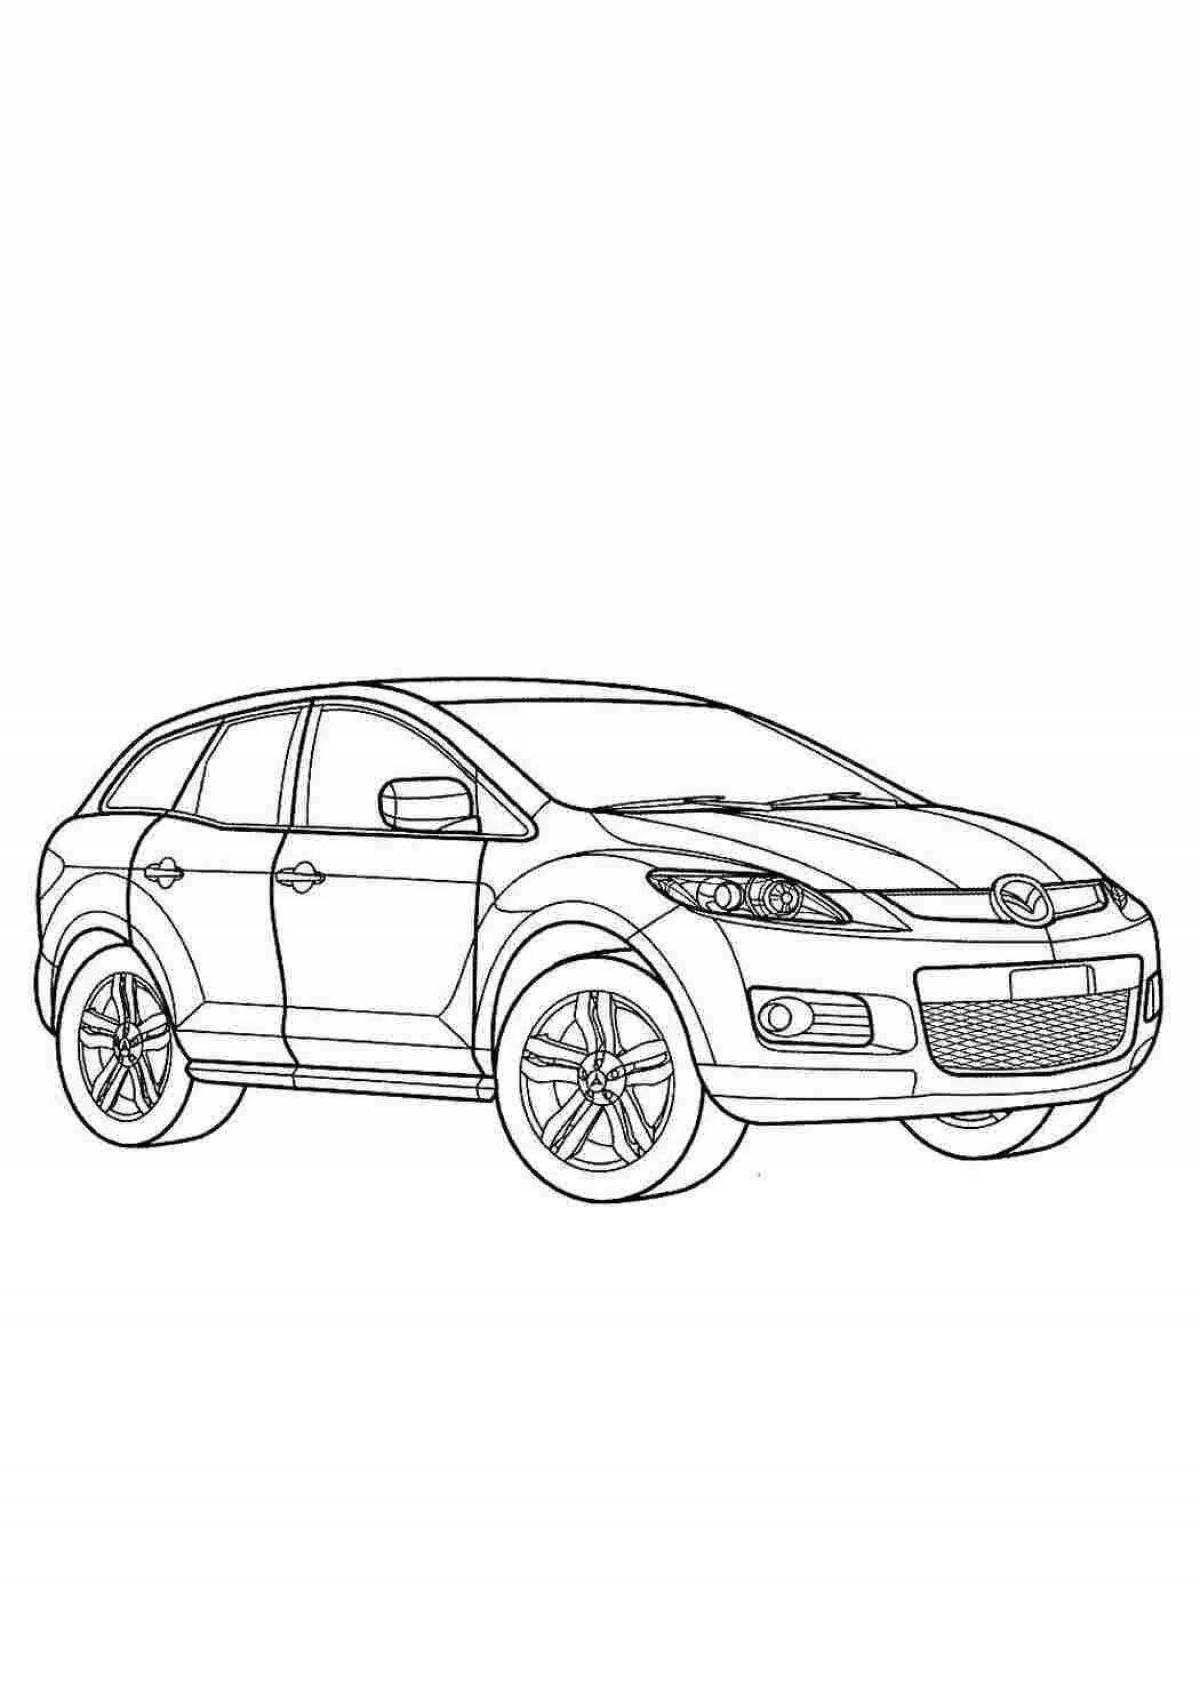 Coloring page with awesome mazda car